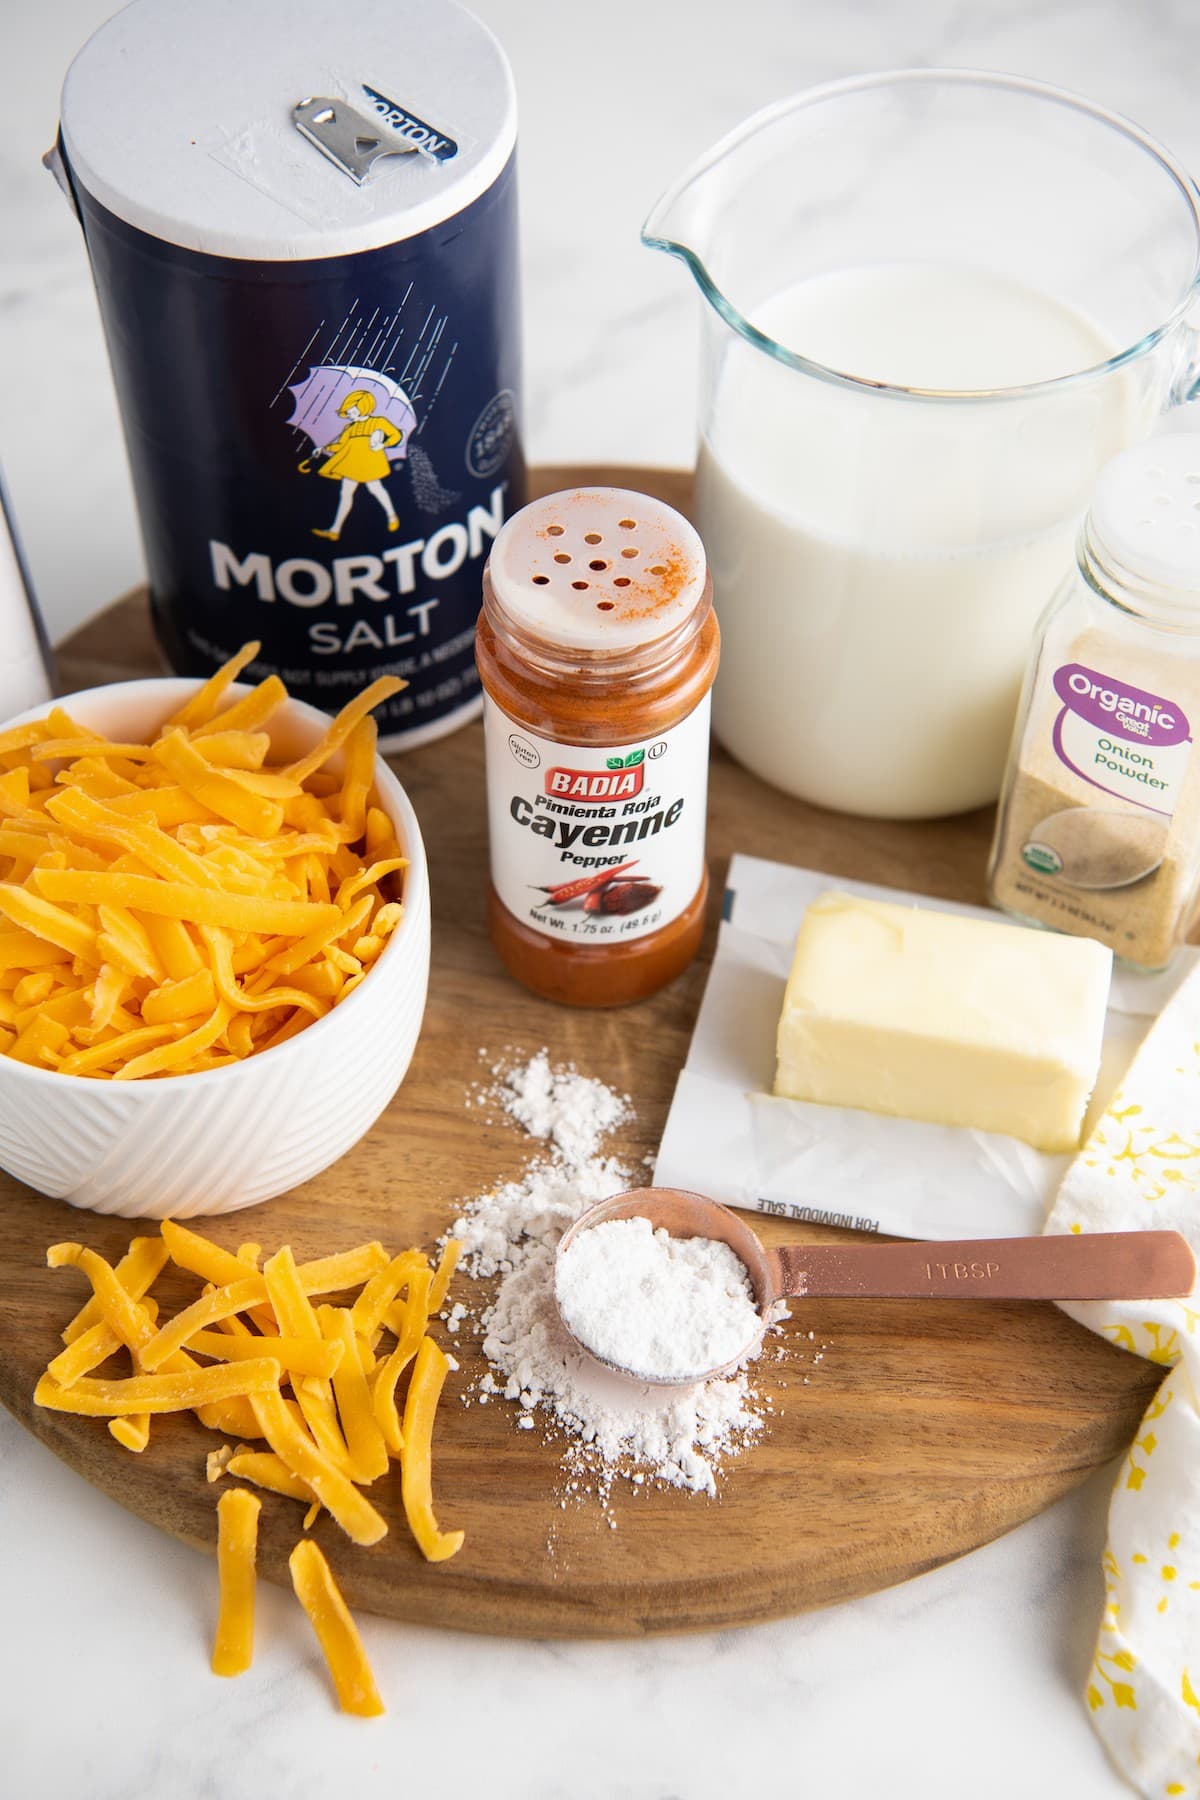 Ingredients for homemade cheese sauce.